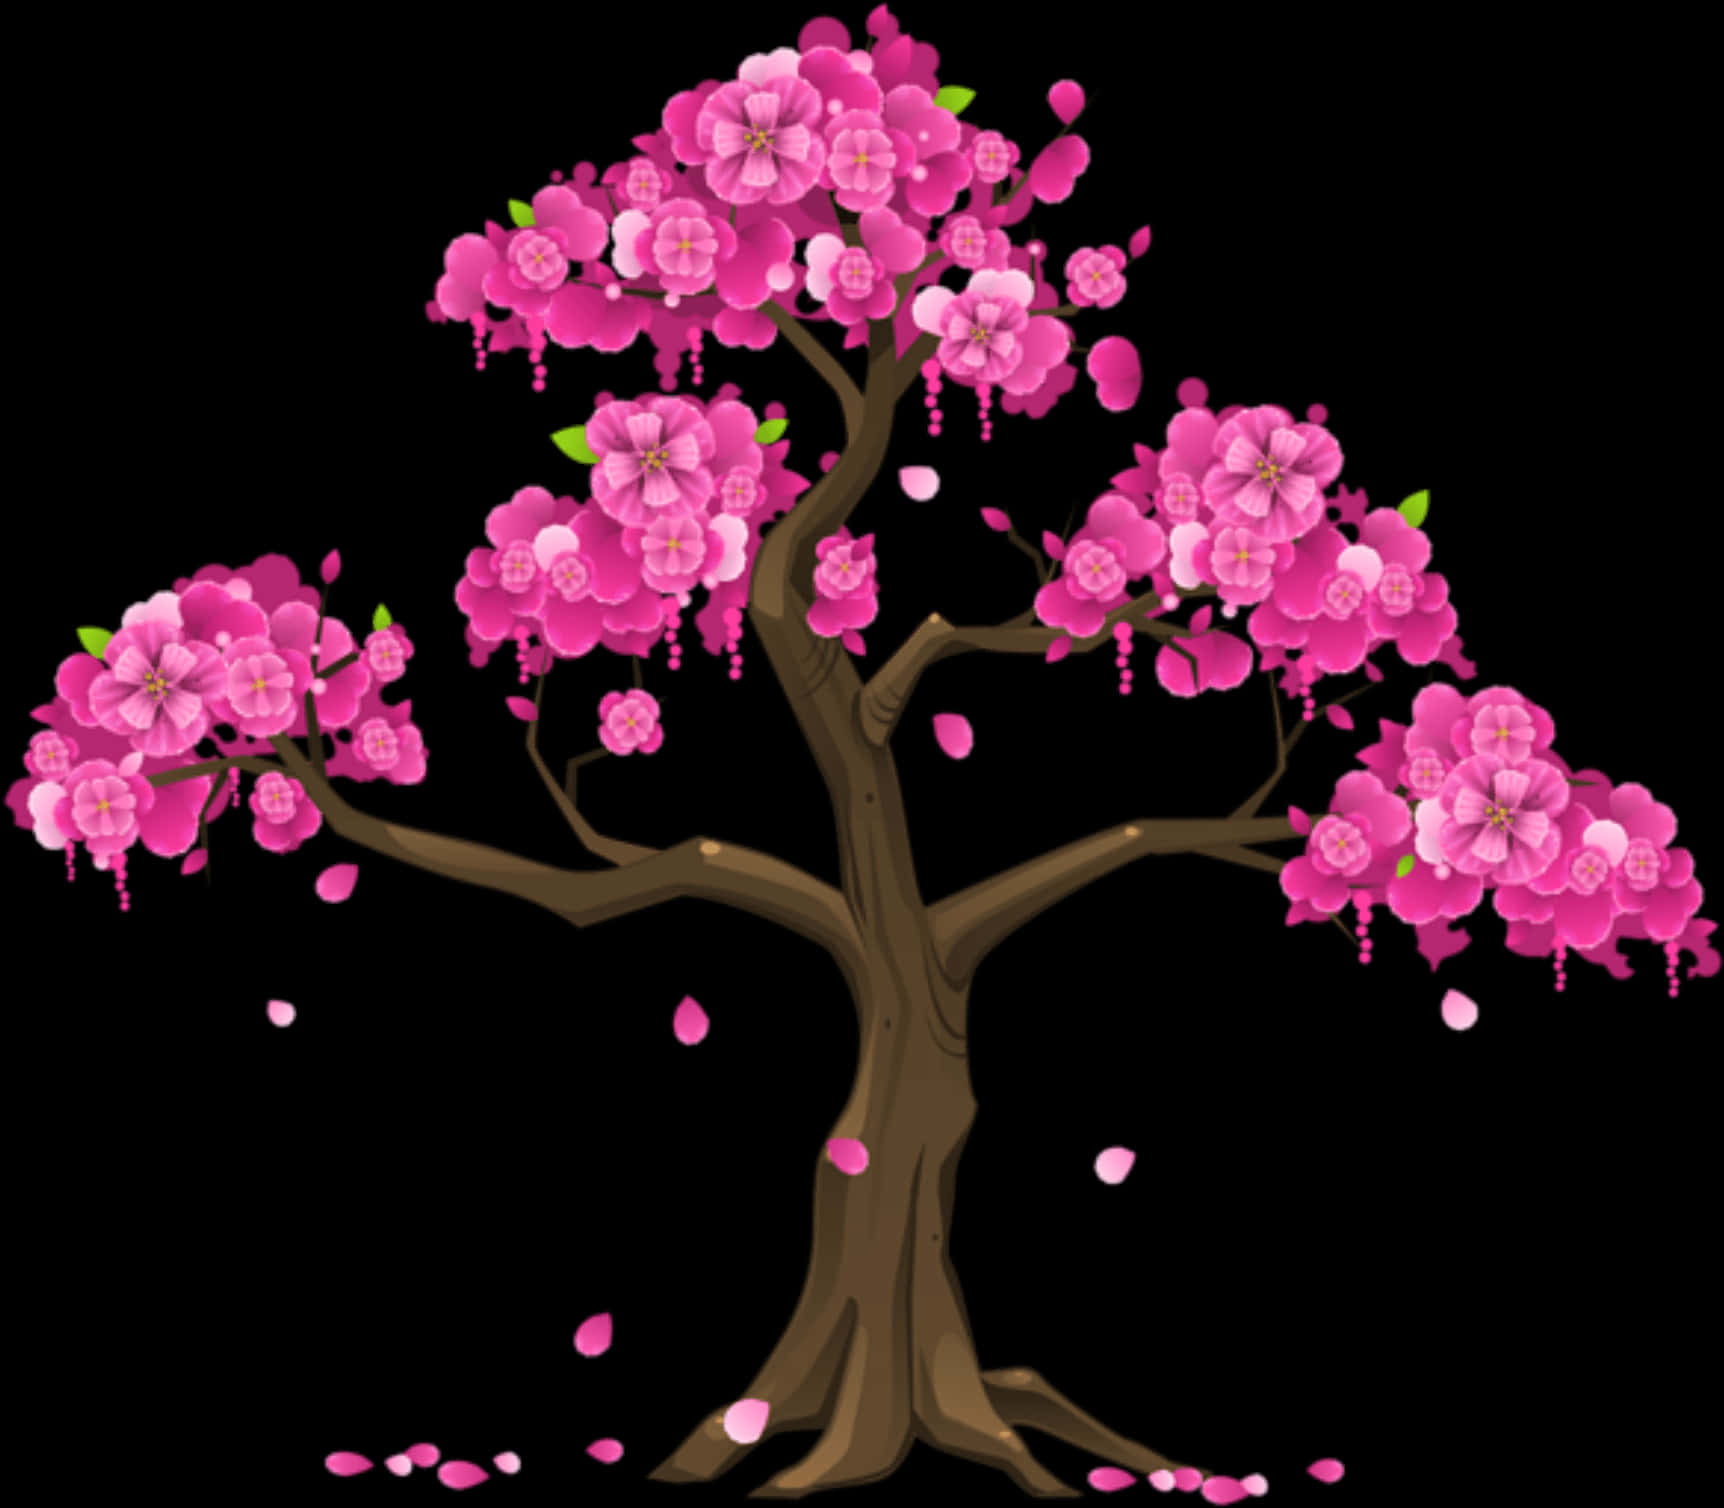 Blooming Pink Floral Tree Illustration PNG